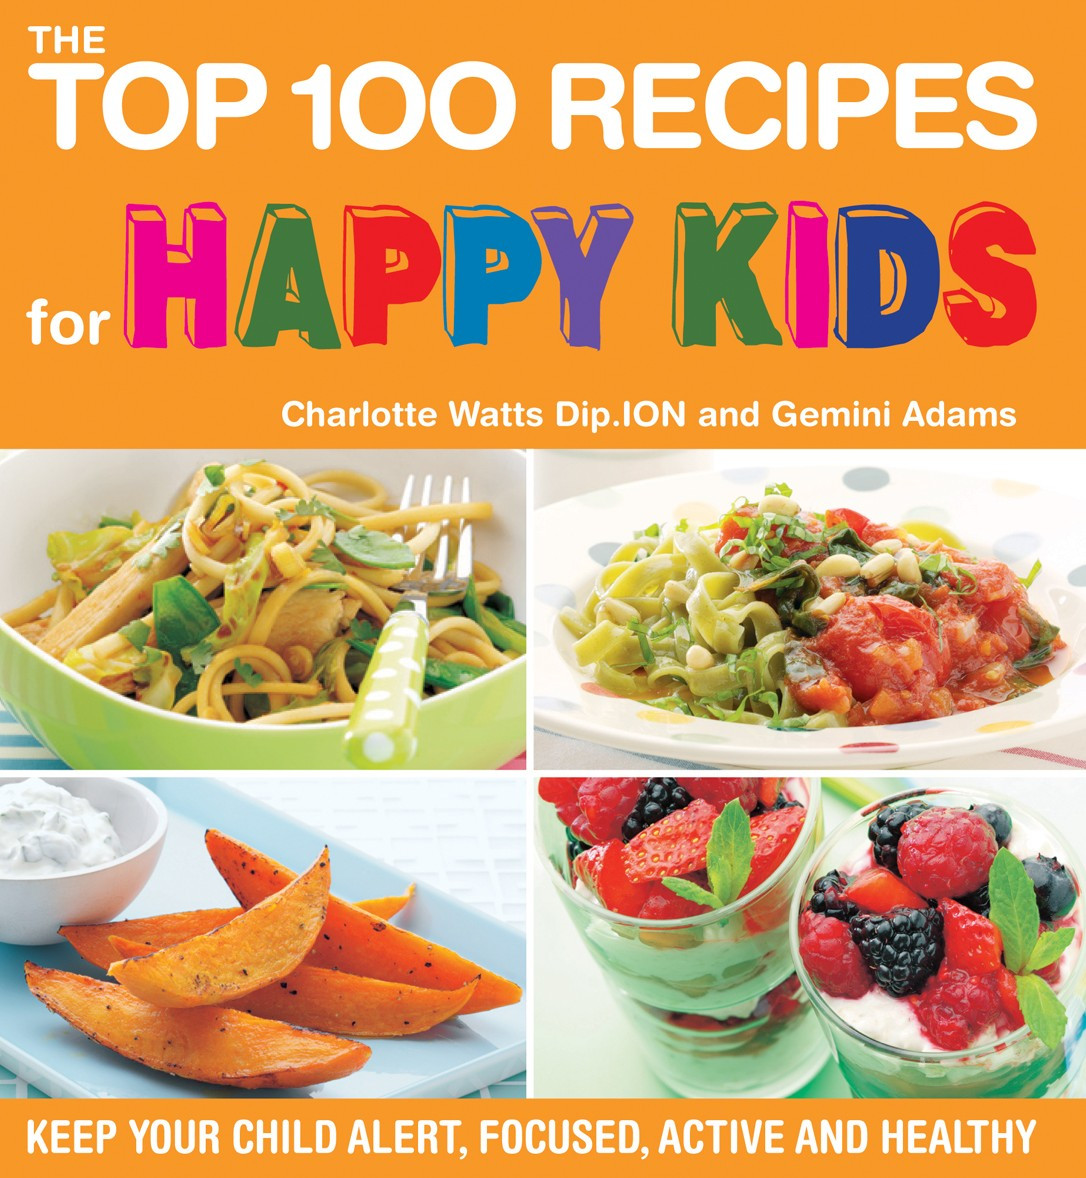 Recipes For Kids
 The Top 100 Recipes for Happy Kids Healthy Food